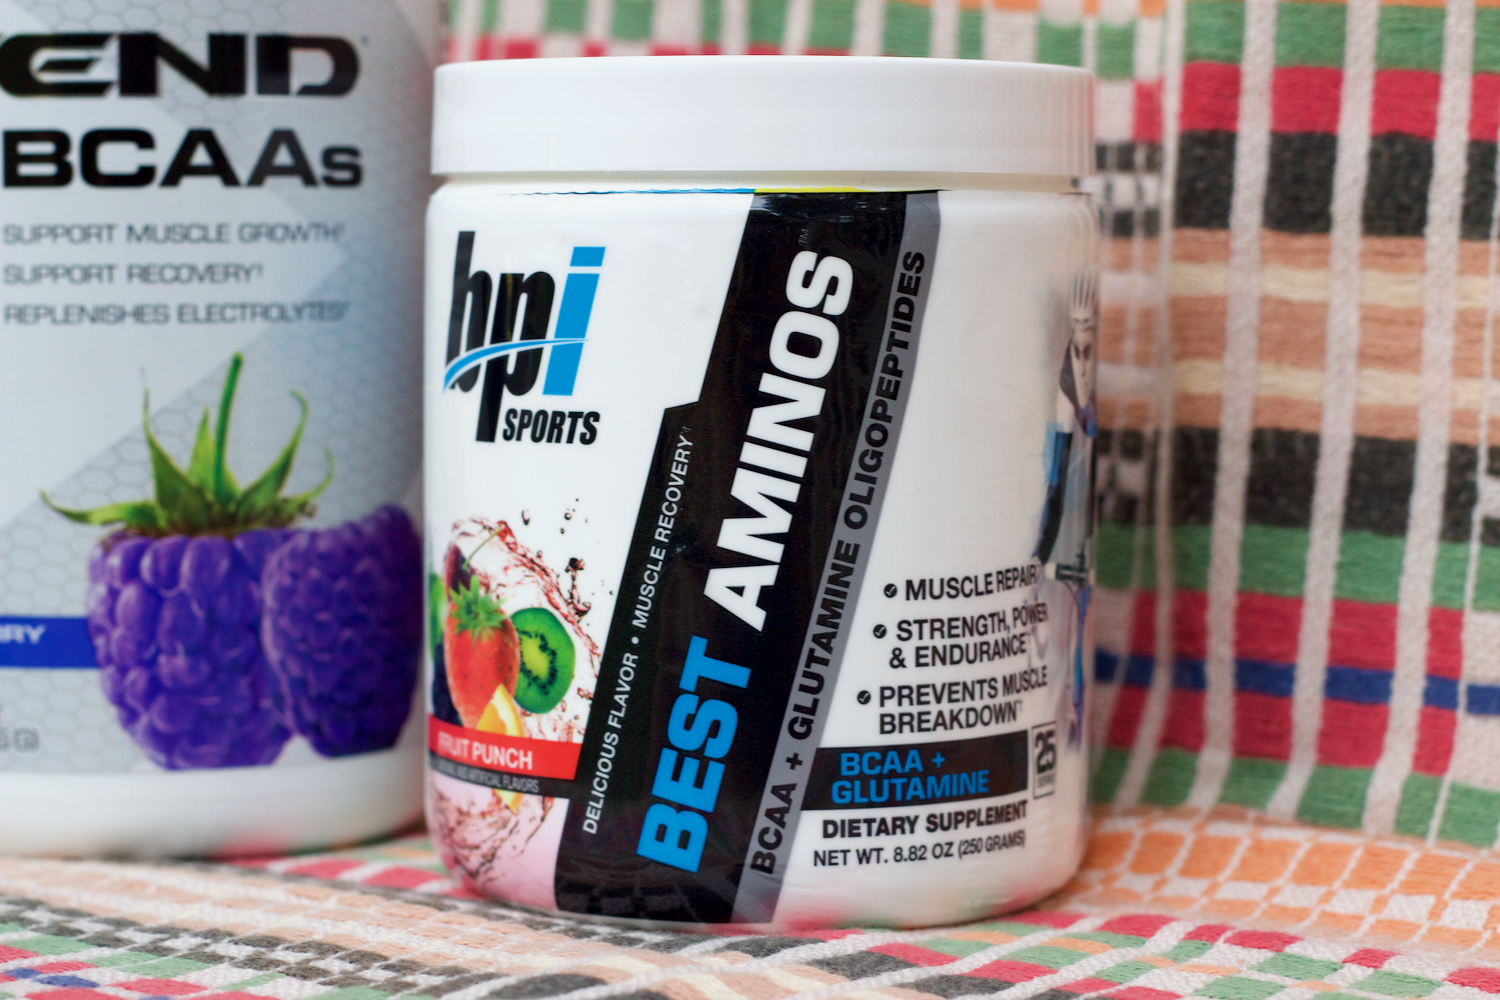 Supplements can take your training to the next level. Check out my current workout supplements!